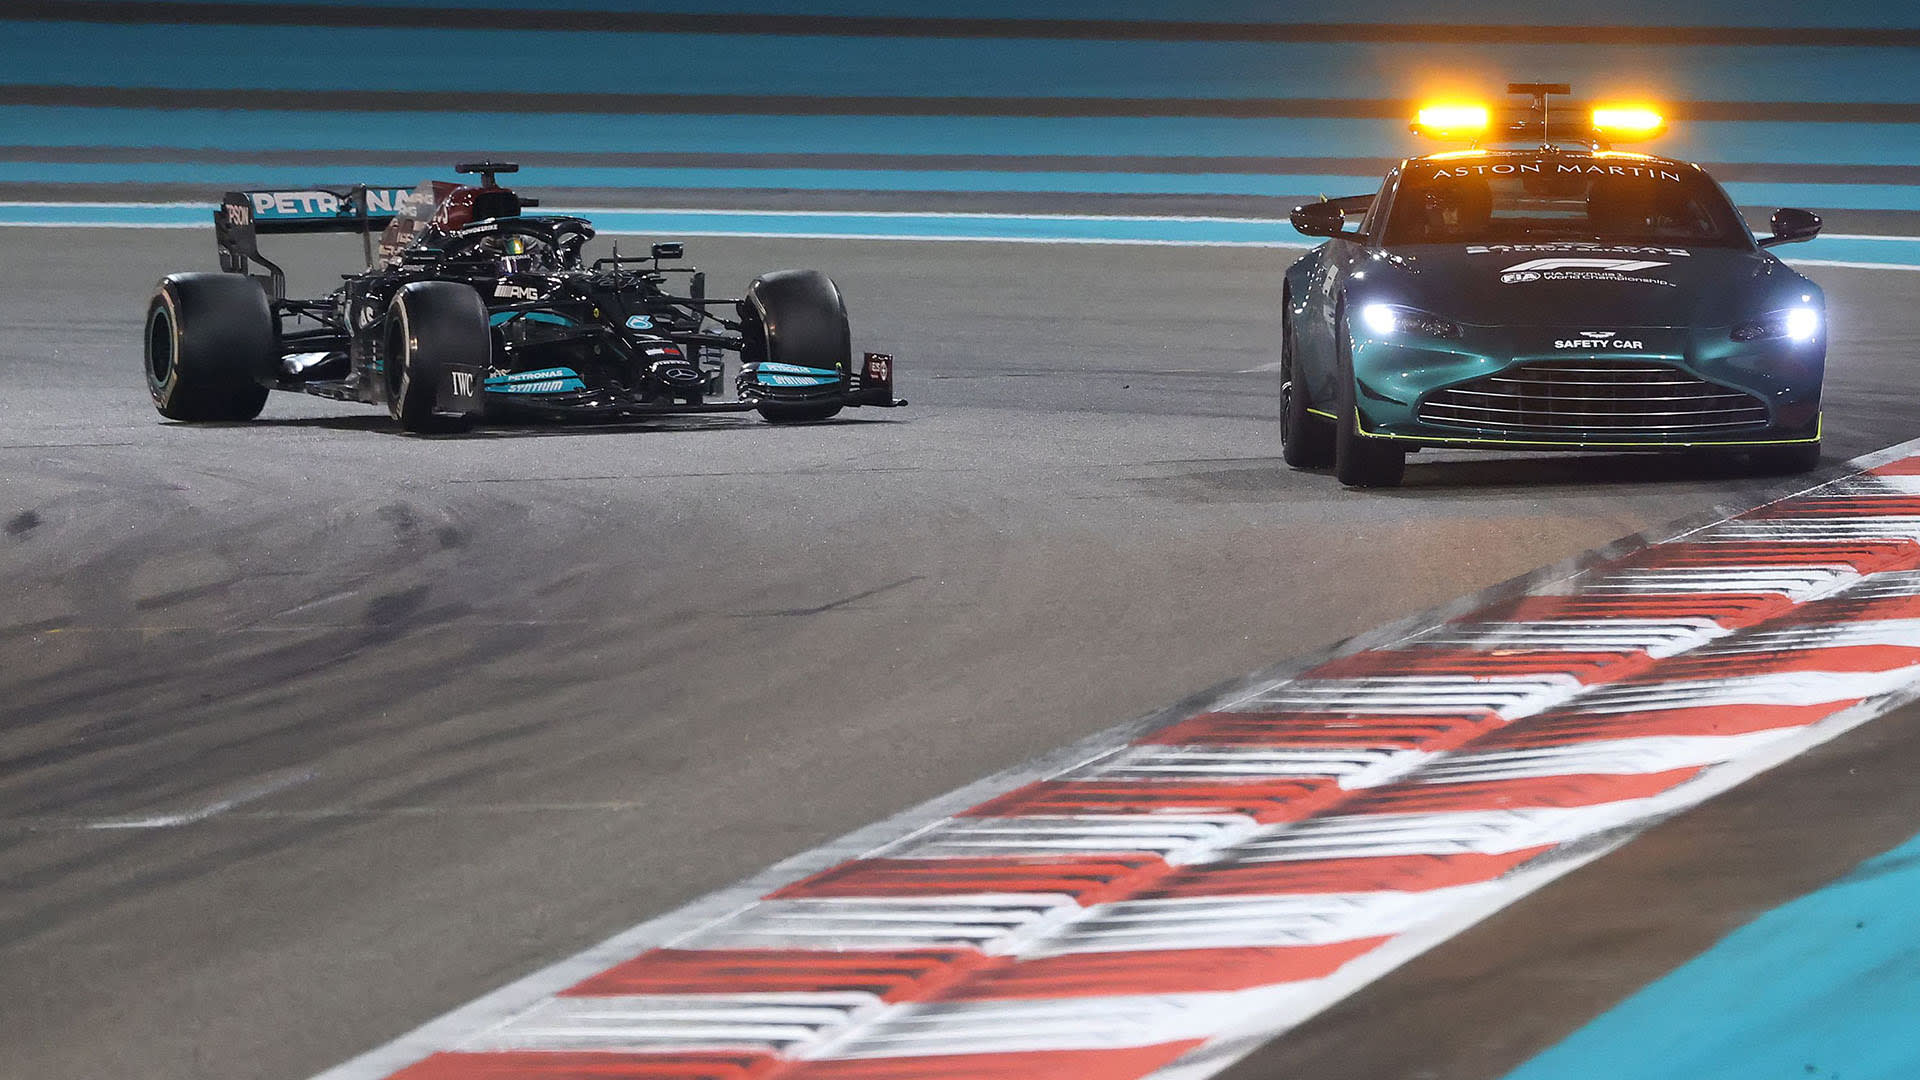 Mercedes say they won’t pursue appeal of Abu Dhabi stewards decision, as FIA announce investigation  | Formula 1®